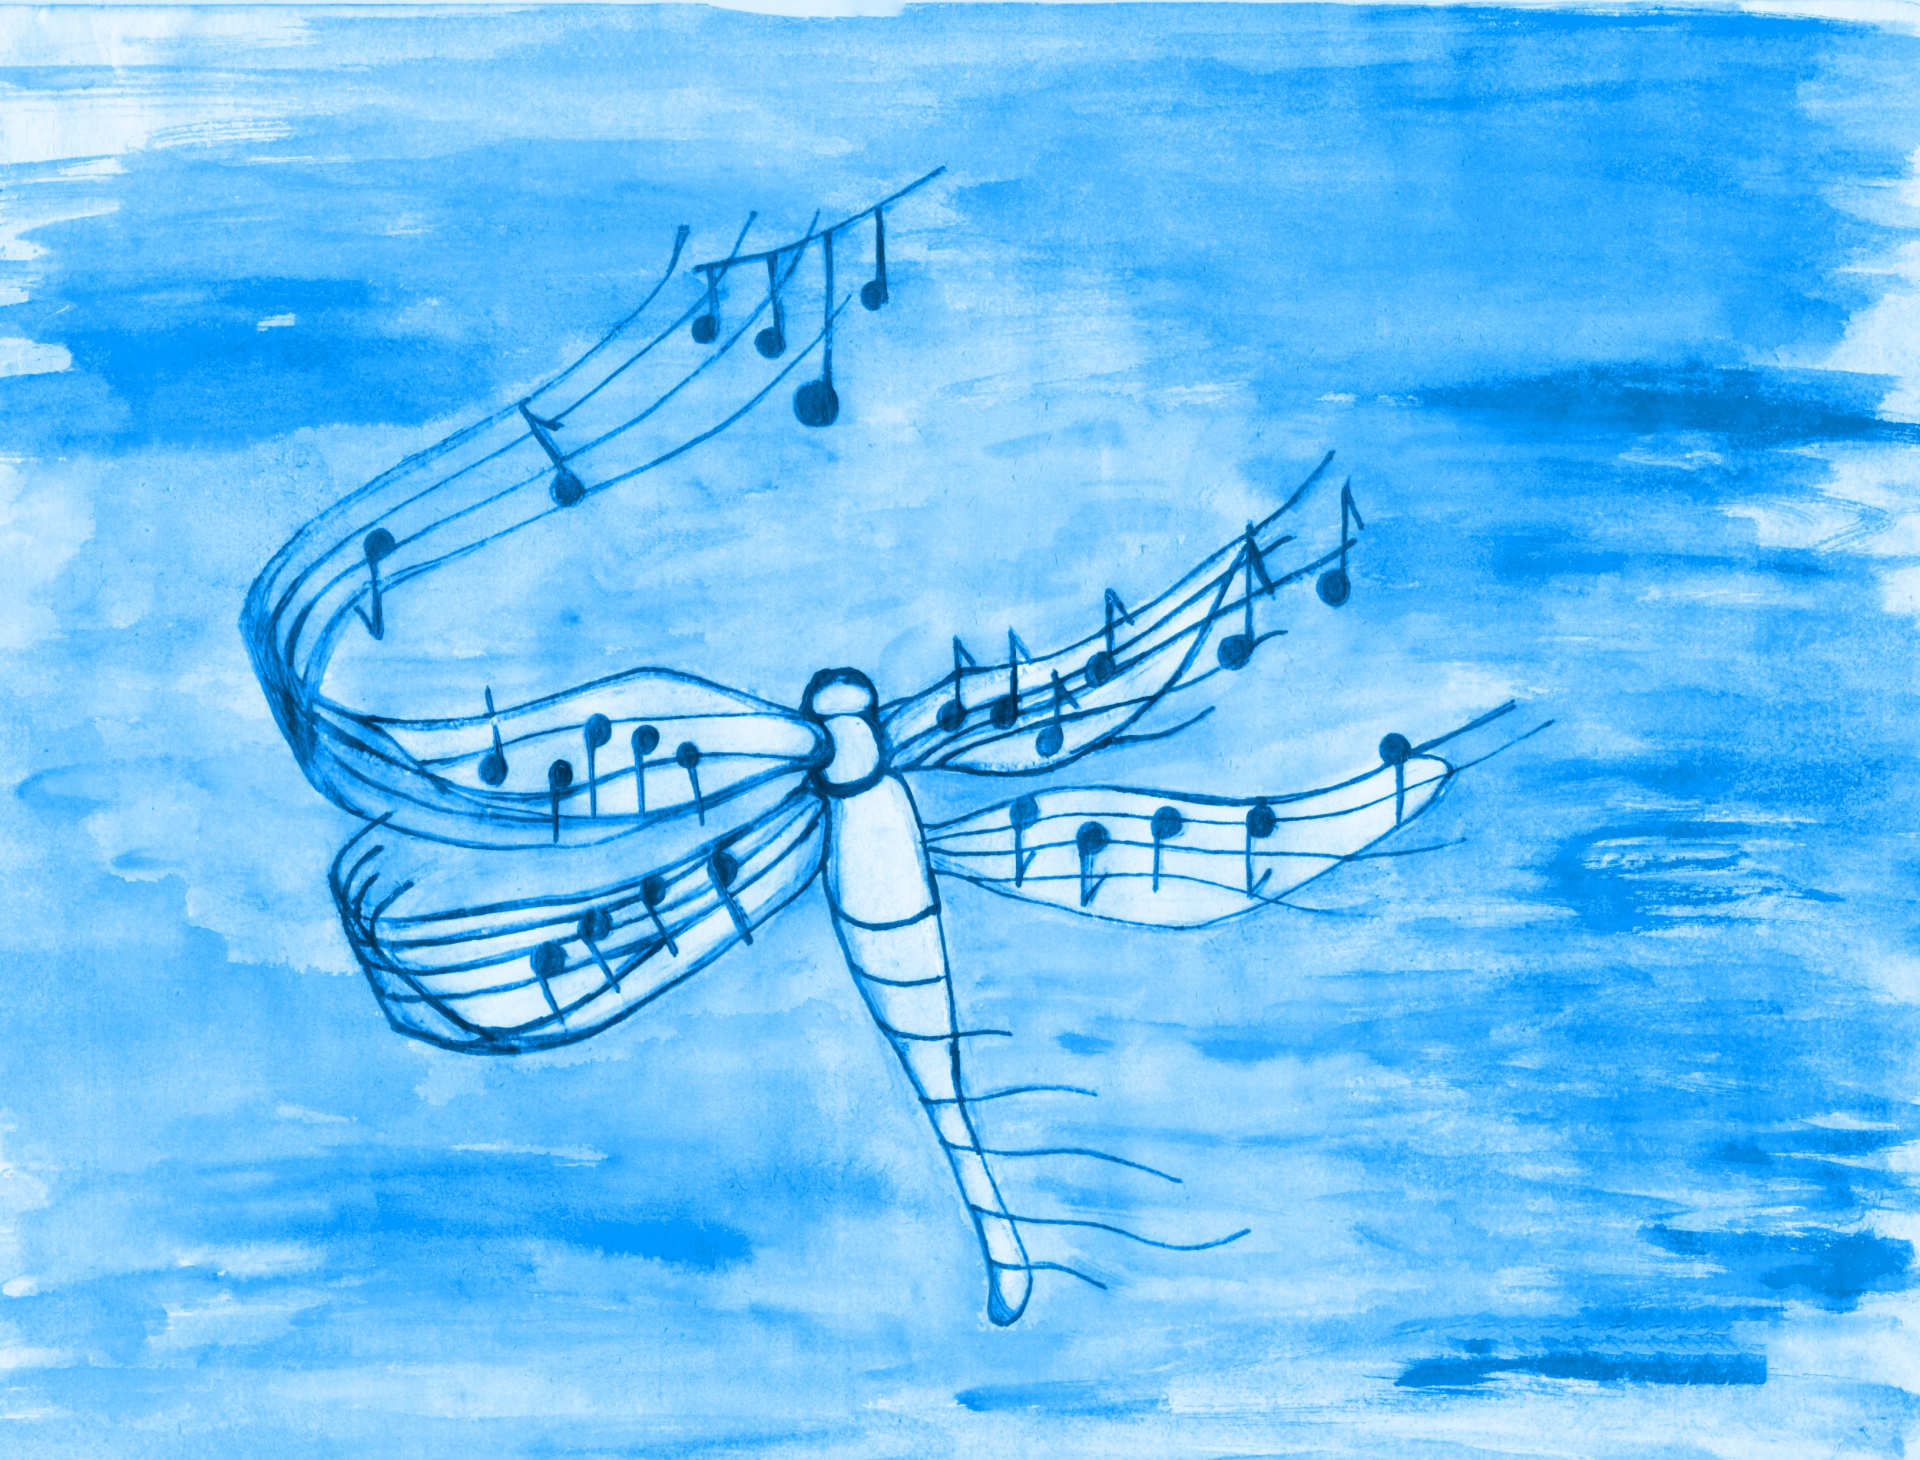 Dragonfly With Musical Notes.